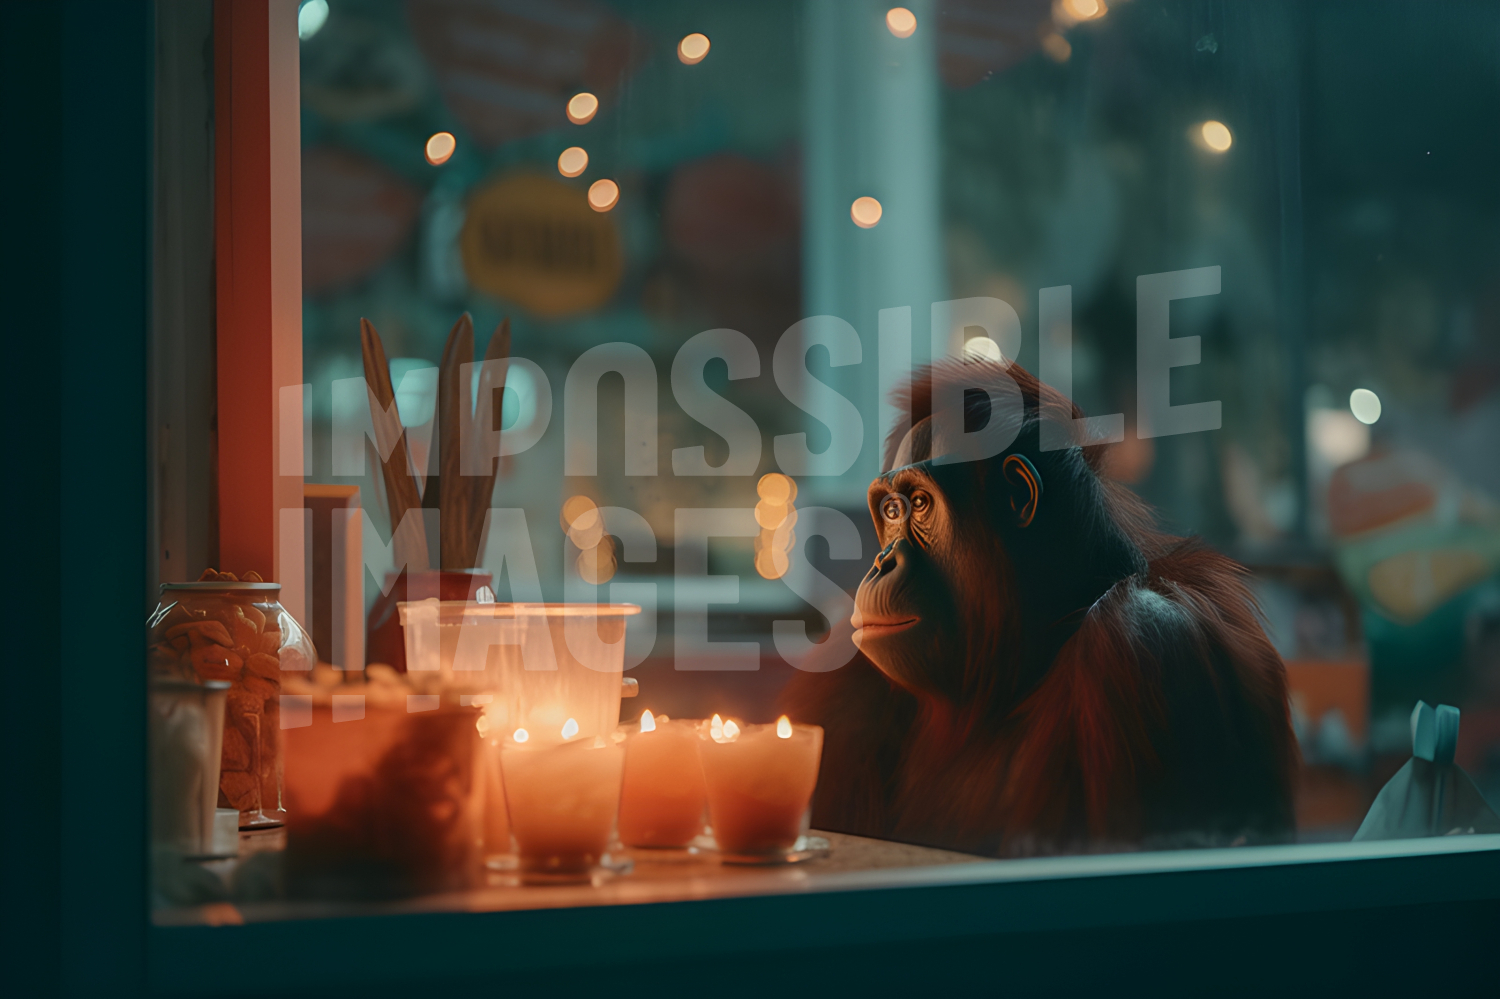 A monkey sitting in front of a window next to candles